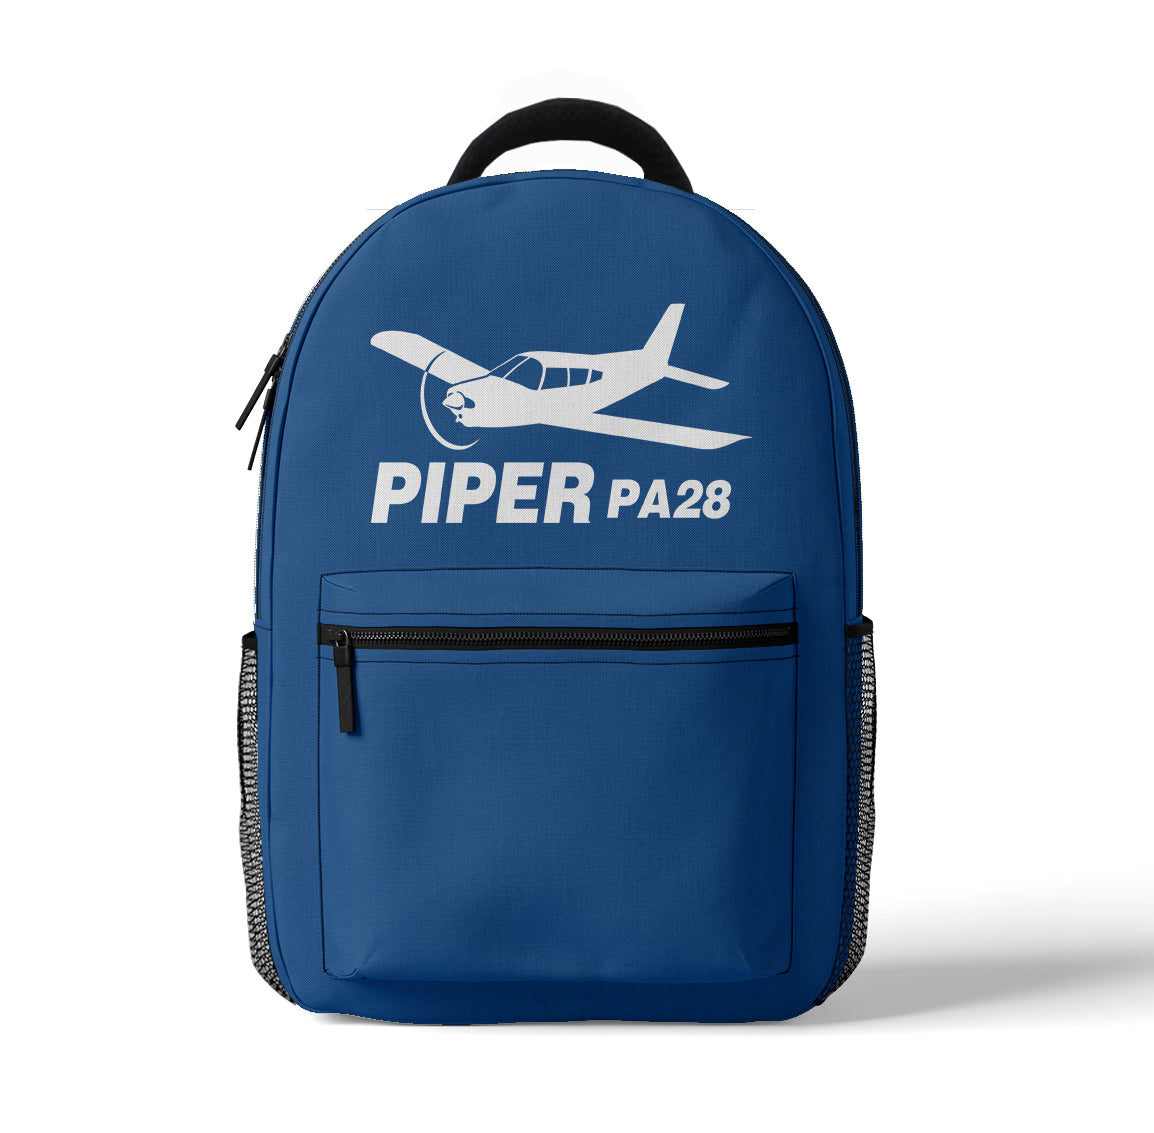 The Piper PA28 Designed 3D Backpacks